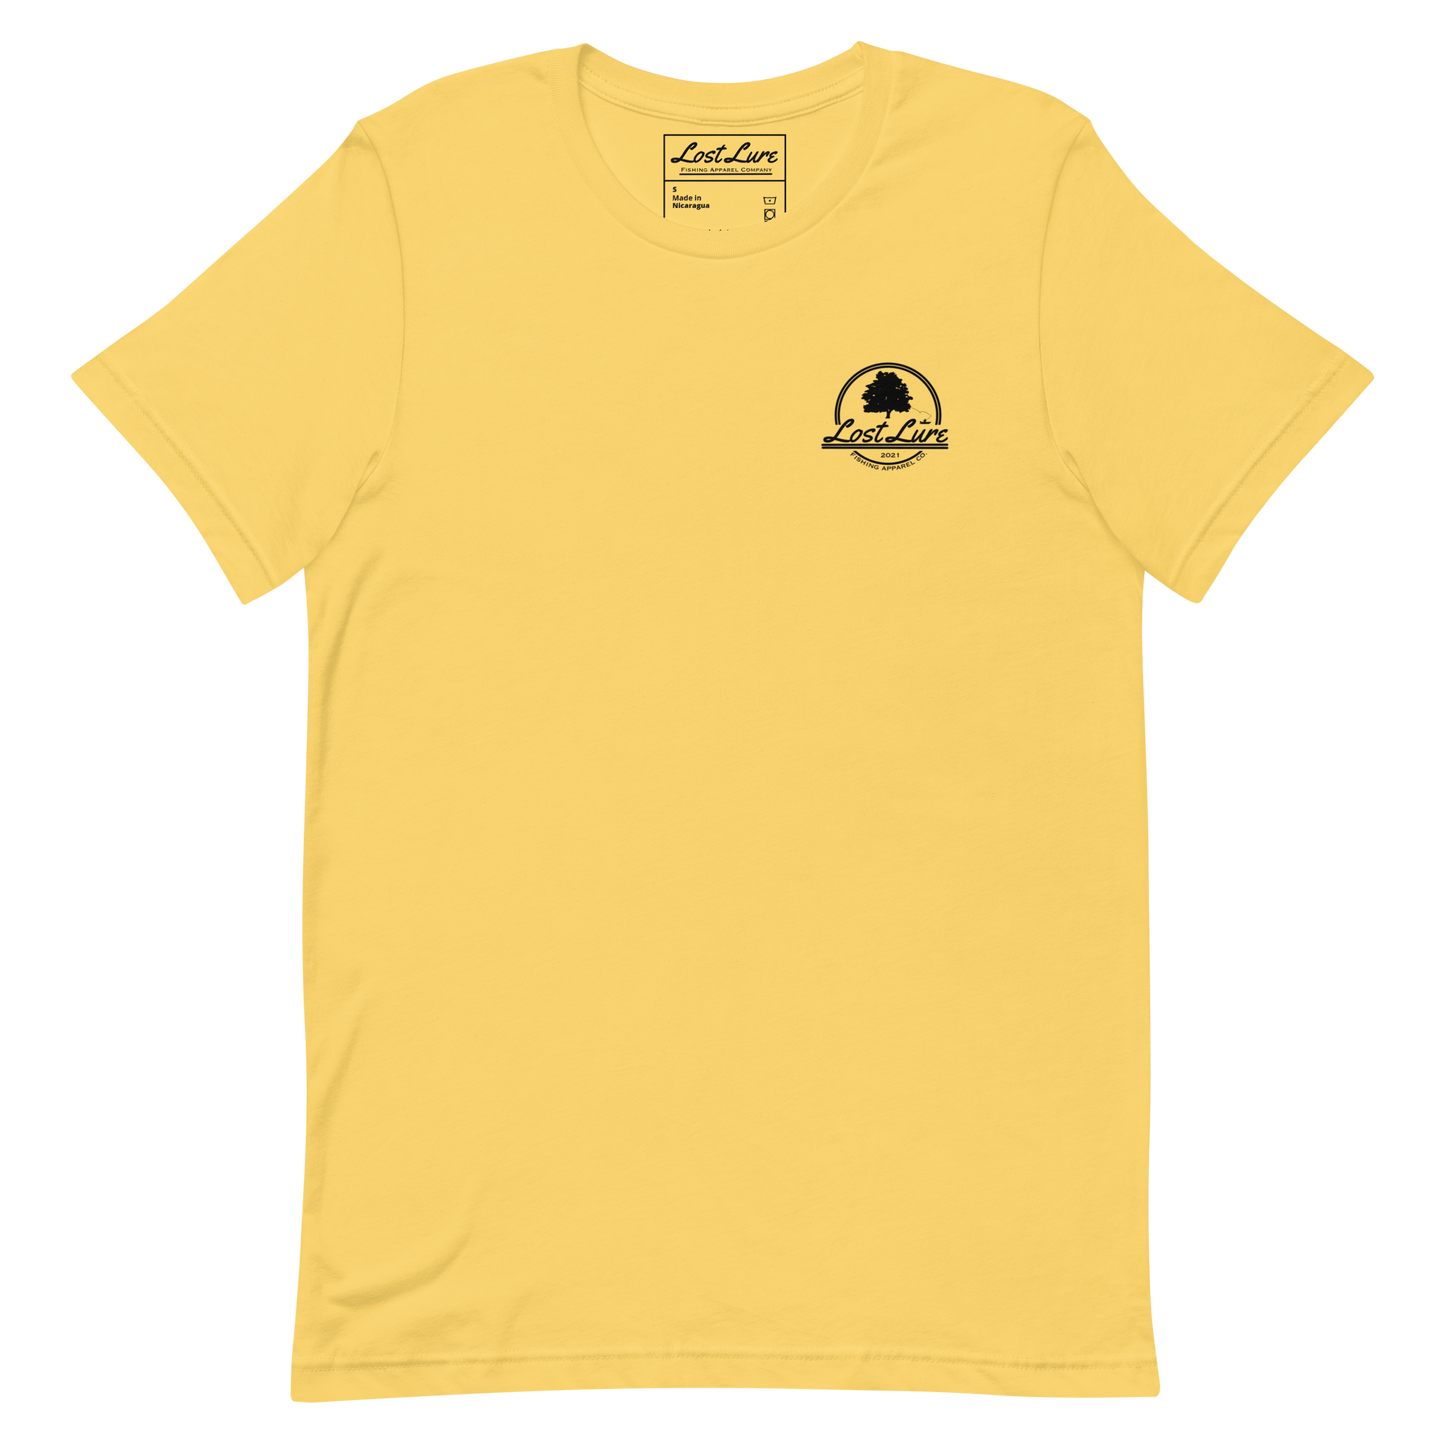 Cutthroat Trout fishing shirt. It’s an American traditional style design with a cutthroat trout and a dagger. The shirt reads Cutthroat trout, est. 2021, lost lure fishing apparel company. The front of the shirt has the lost lure logo. Yellow fishing shirt, front side